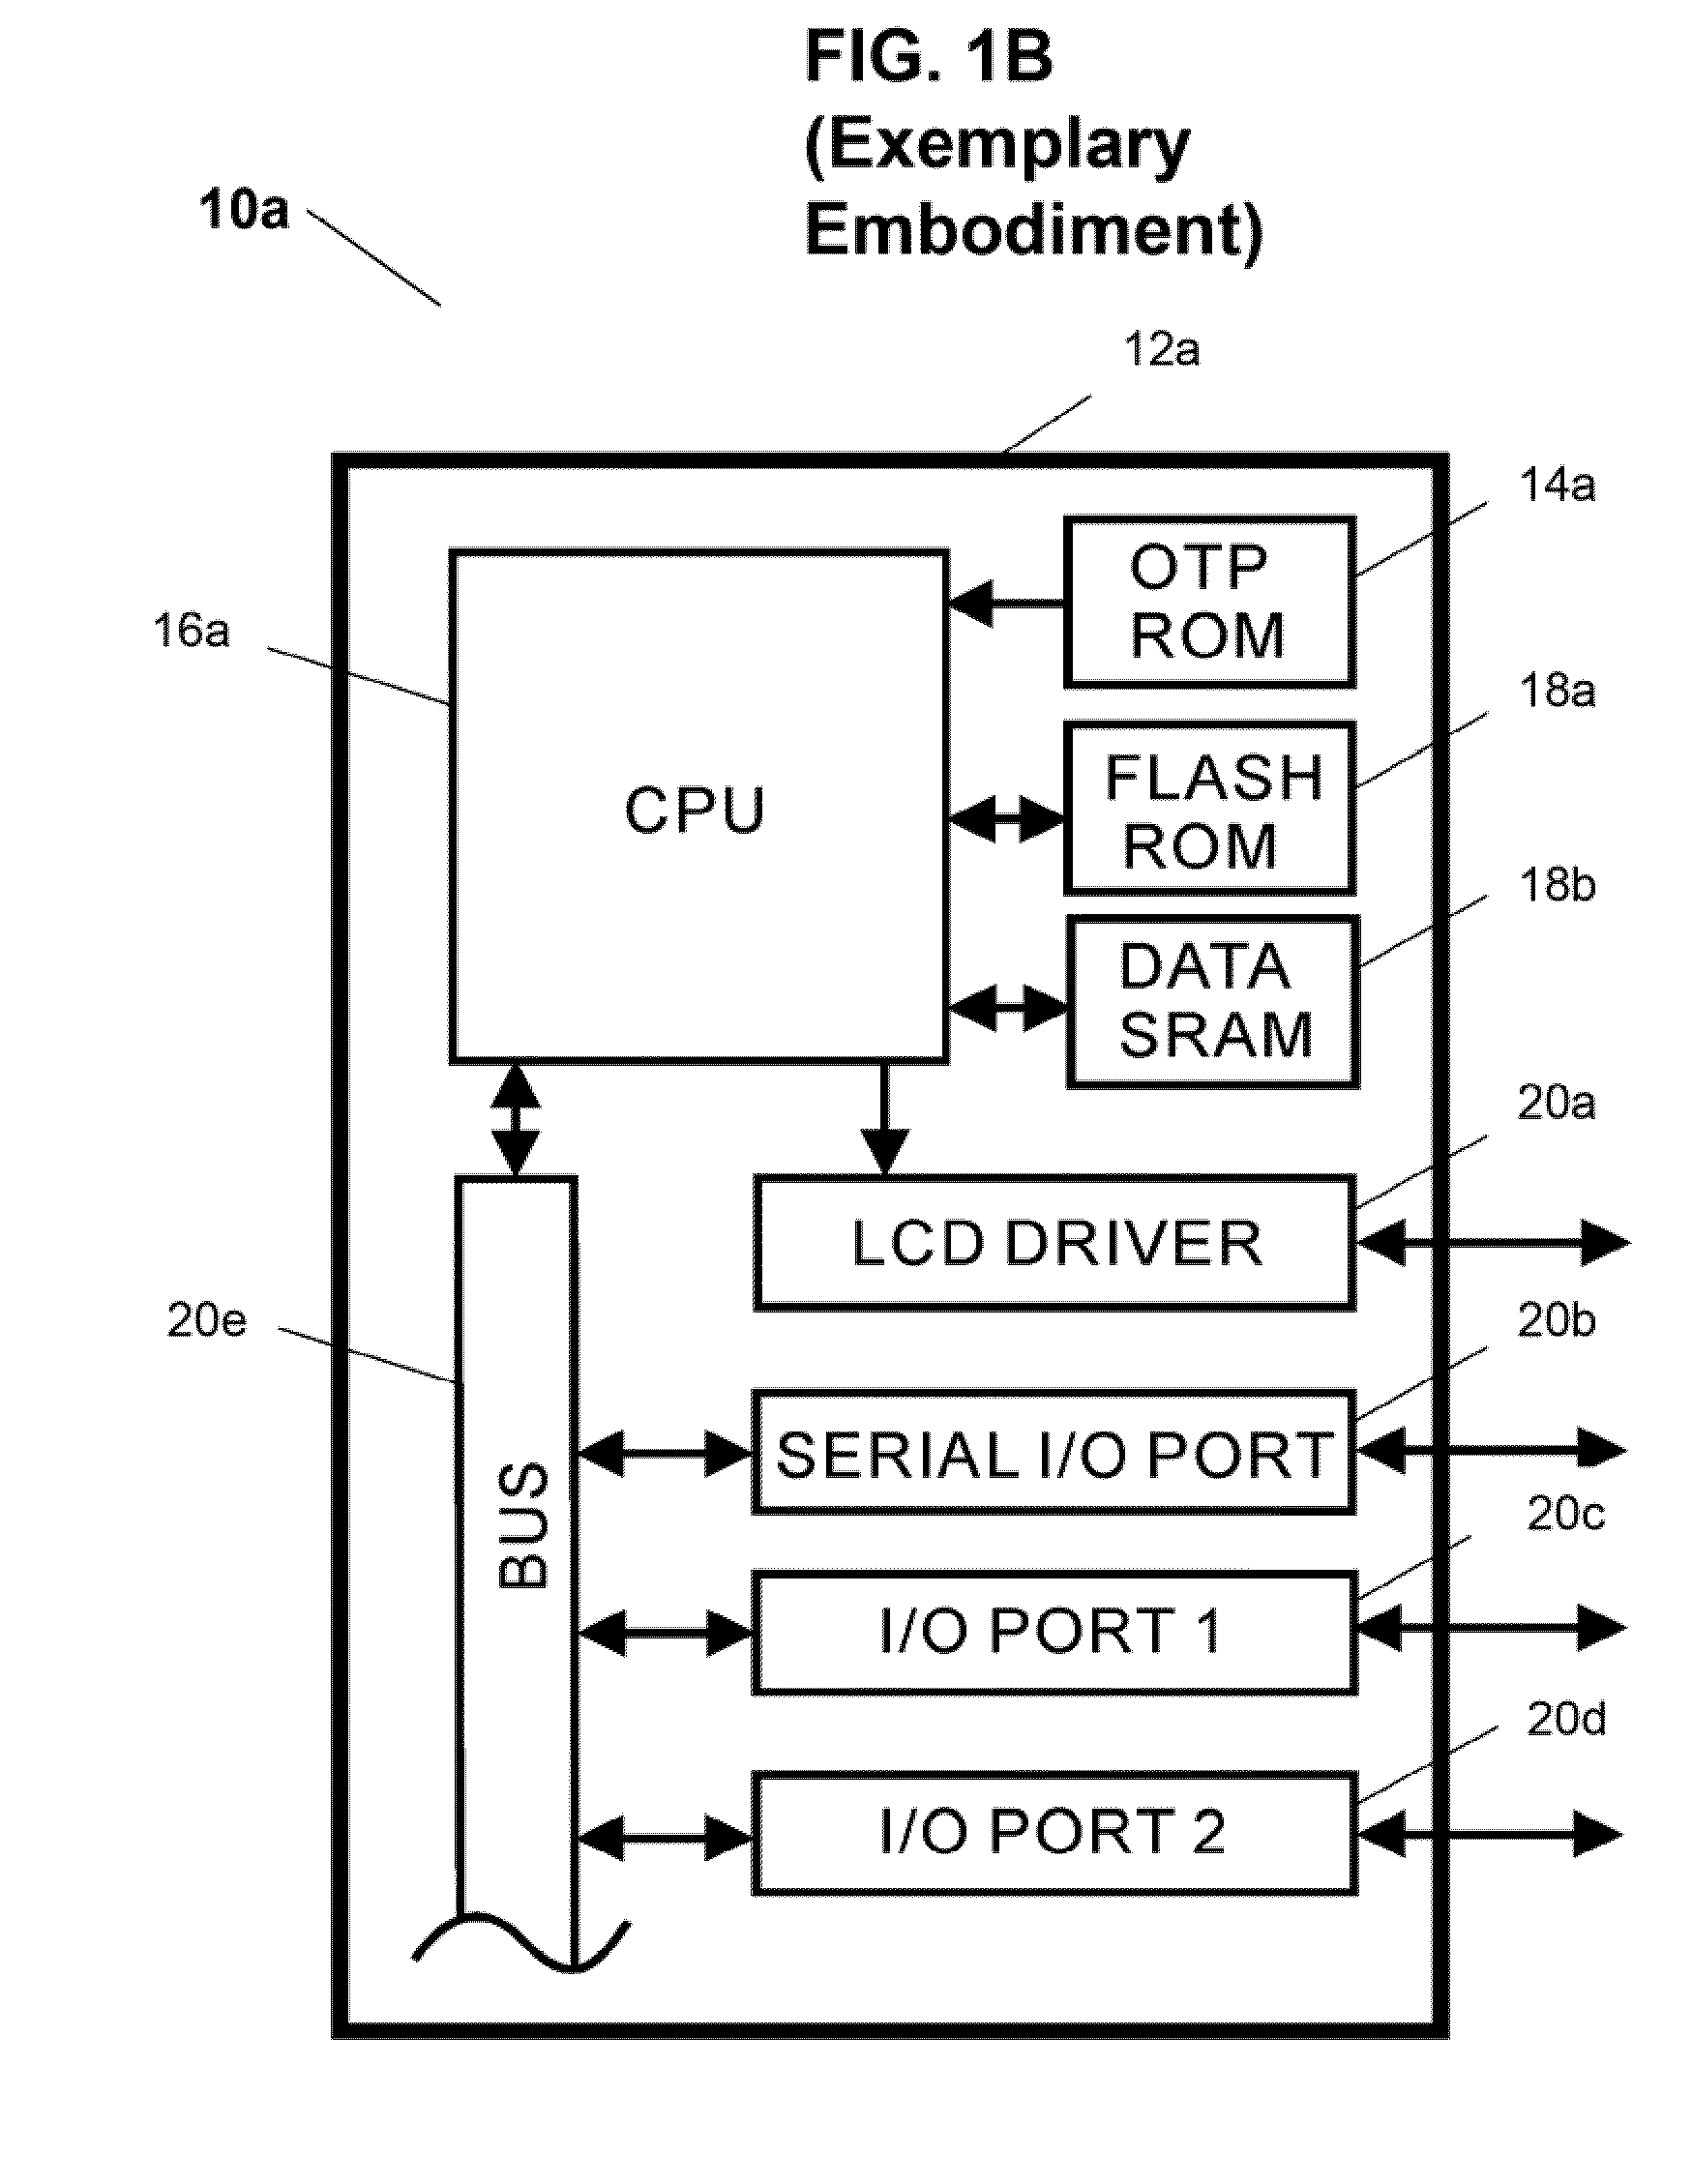 System and method for streamlined registration of electronic products over a communication network and for verification and management of information related thereto